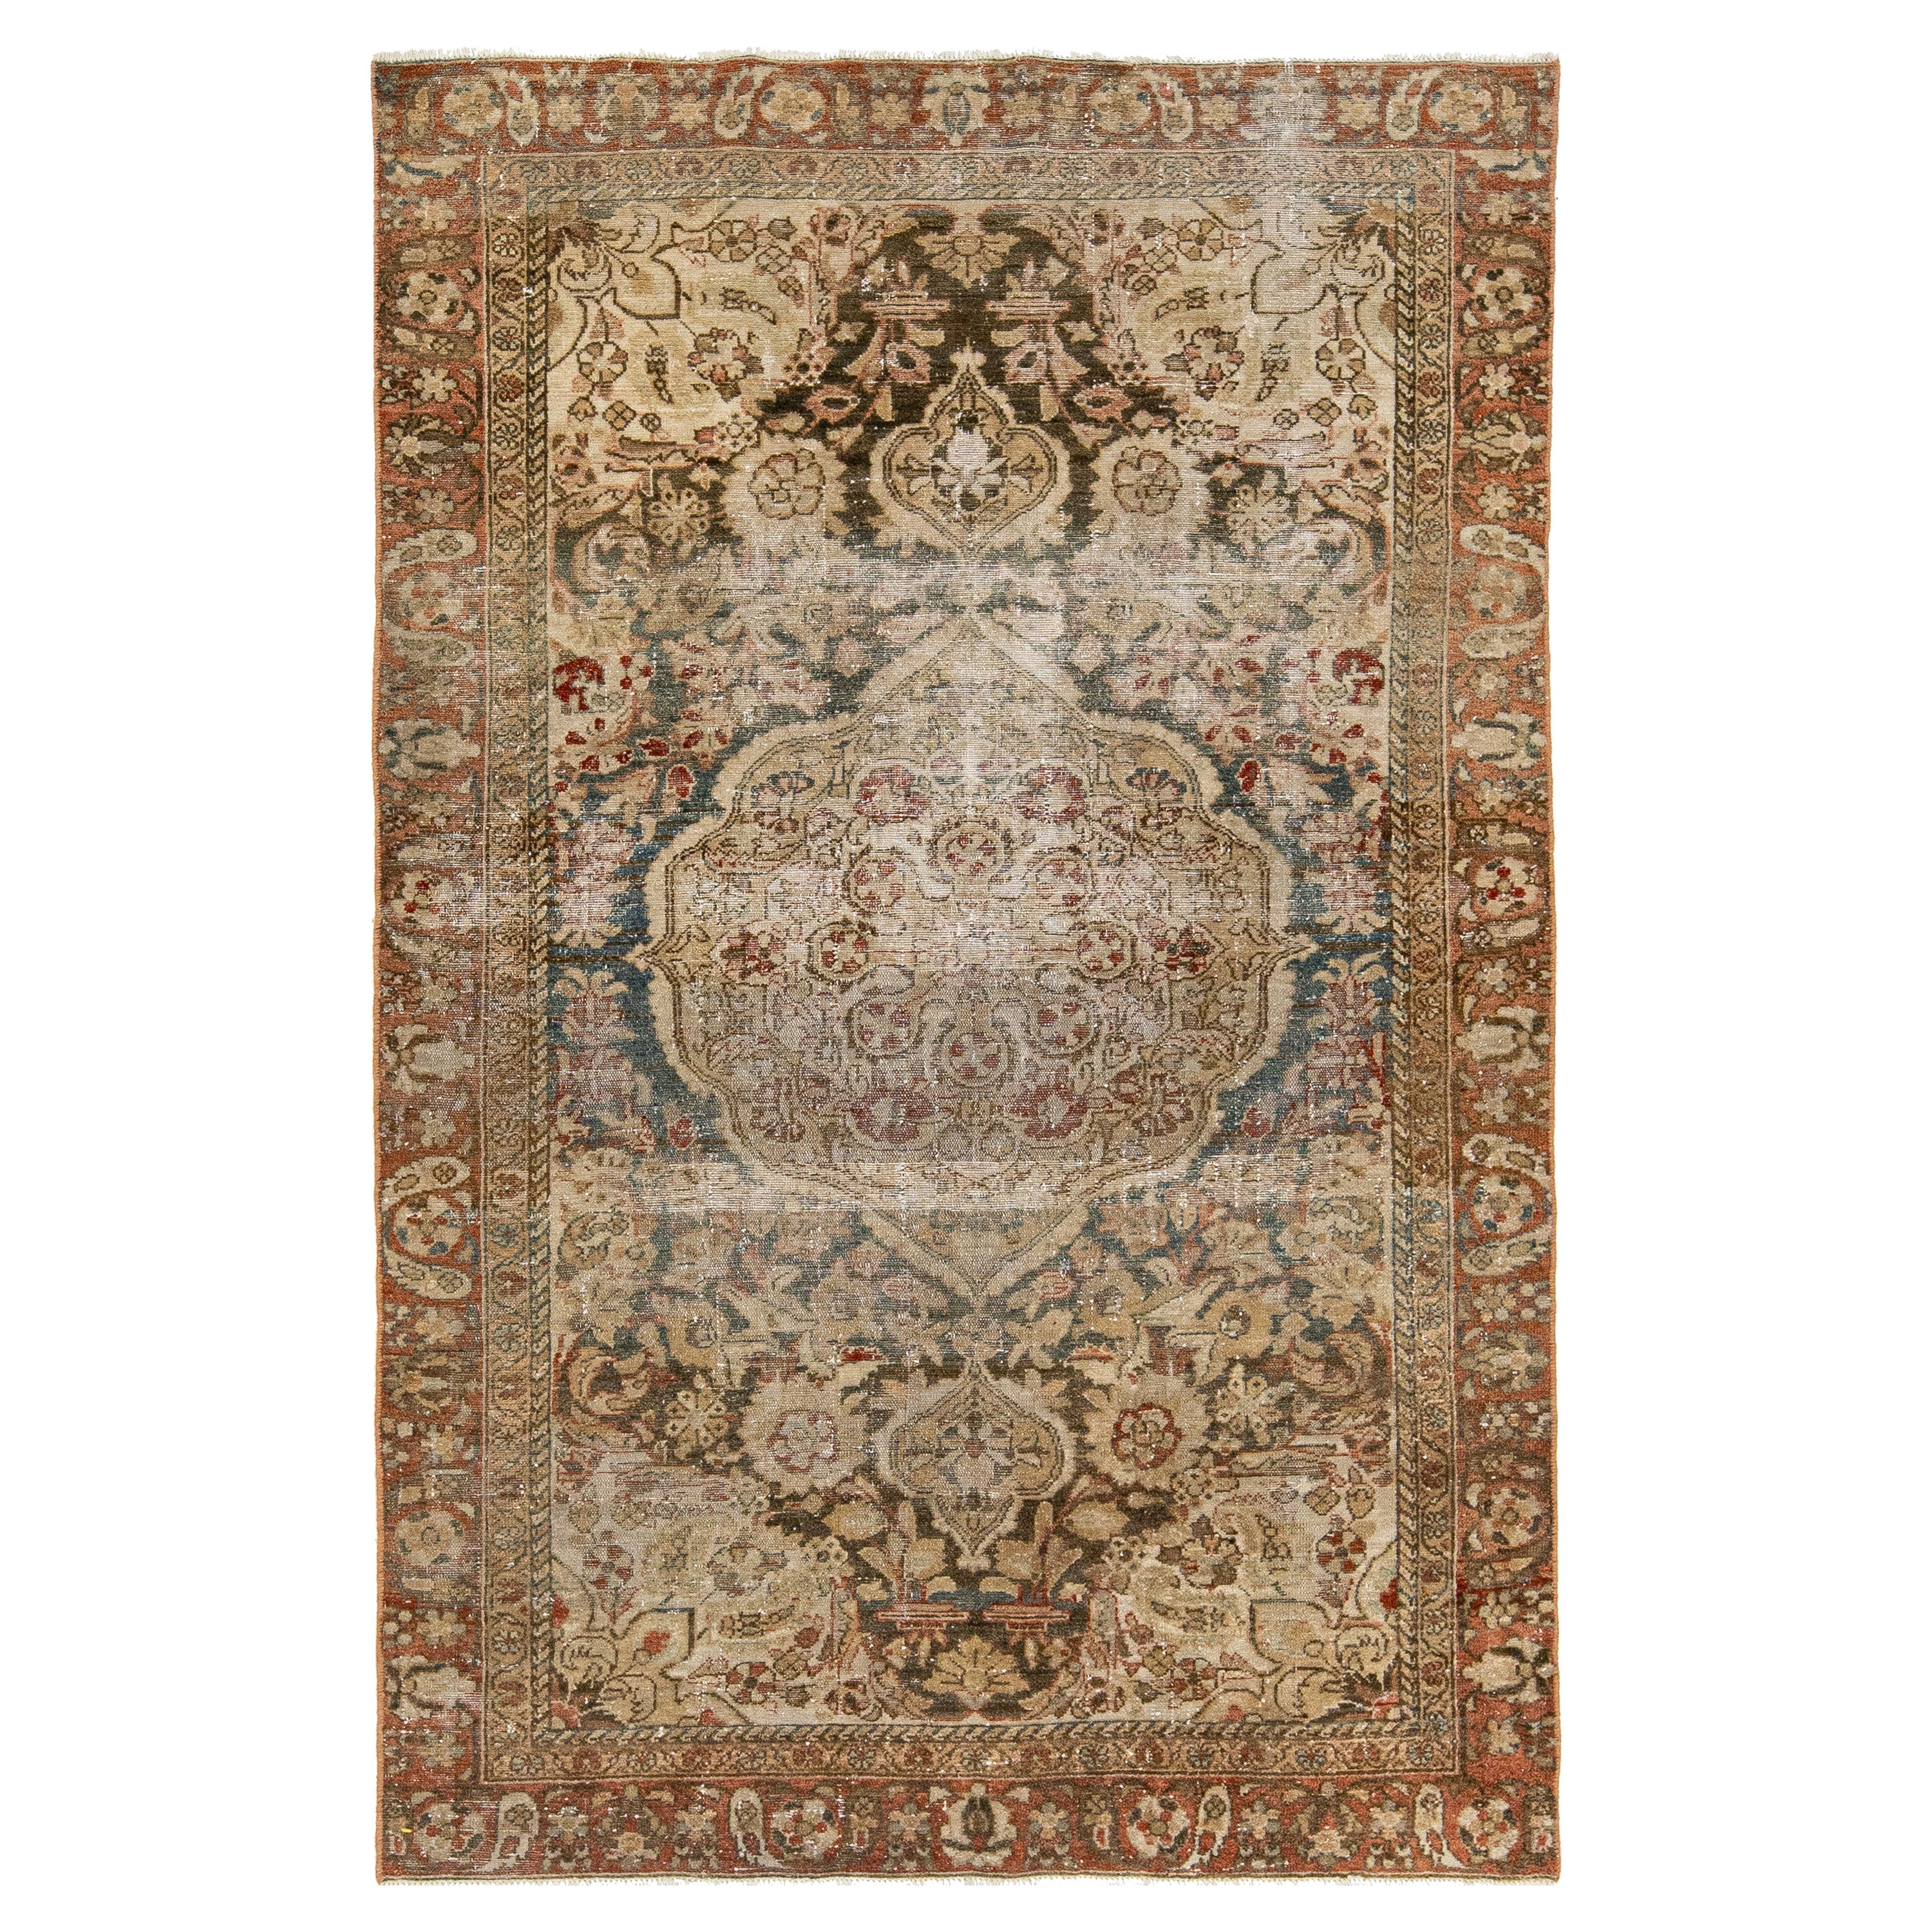 1900s Antique Persian Tabriz Handmade Wool Rug with Medallion Motif For Sale